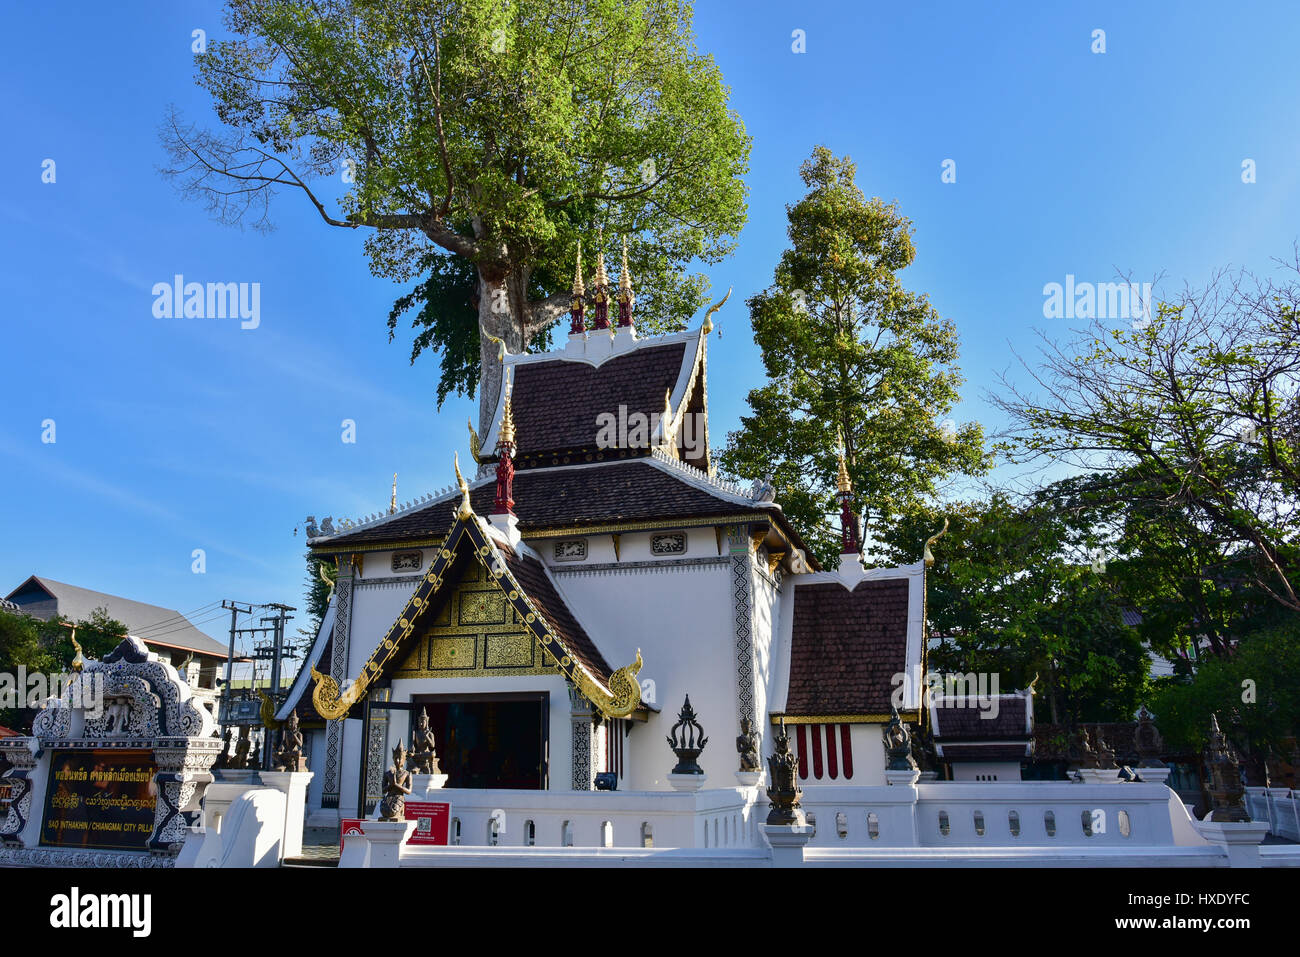 The temple of Sao Inthakin with dipterocarp tree (Yang trees) in the background, Chiang Mai - Thailand Stock Photo